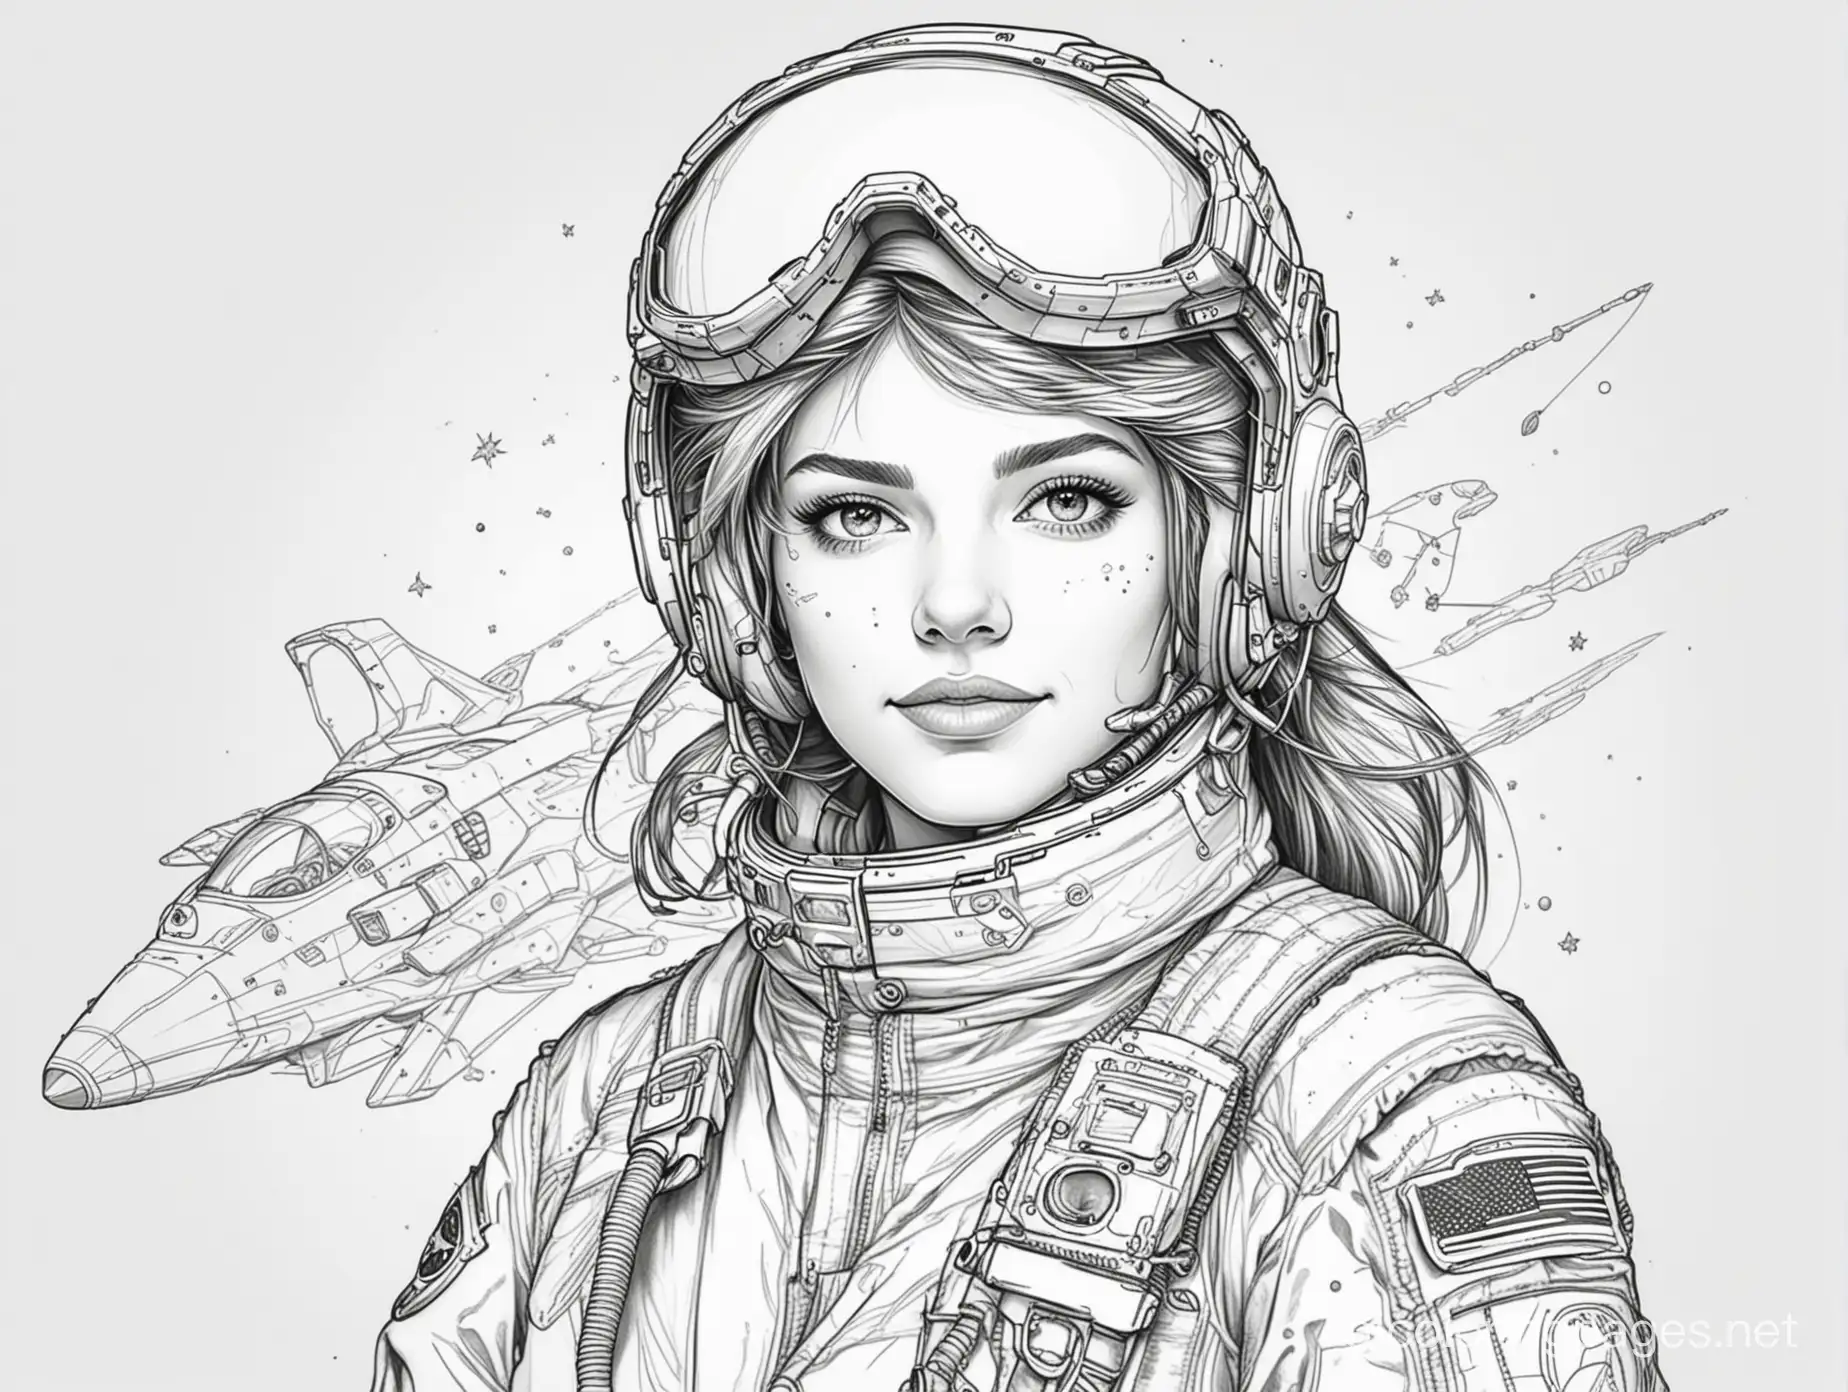 Female galactic pilot, Coloring Page, black and white, line art, white background, Simplicity, Ample White Space. The background of the coloring page is plain white to make it easy for young children to color within the lines. The outlines of all the subjects are easy to distinguish, making it simple for kids to color without too much difficulty